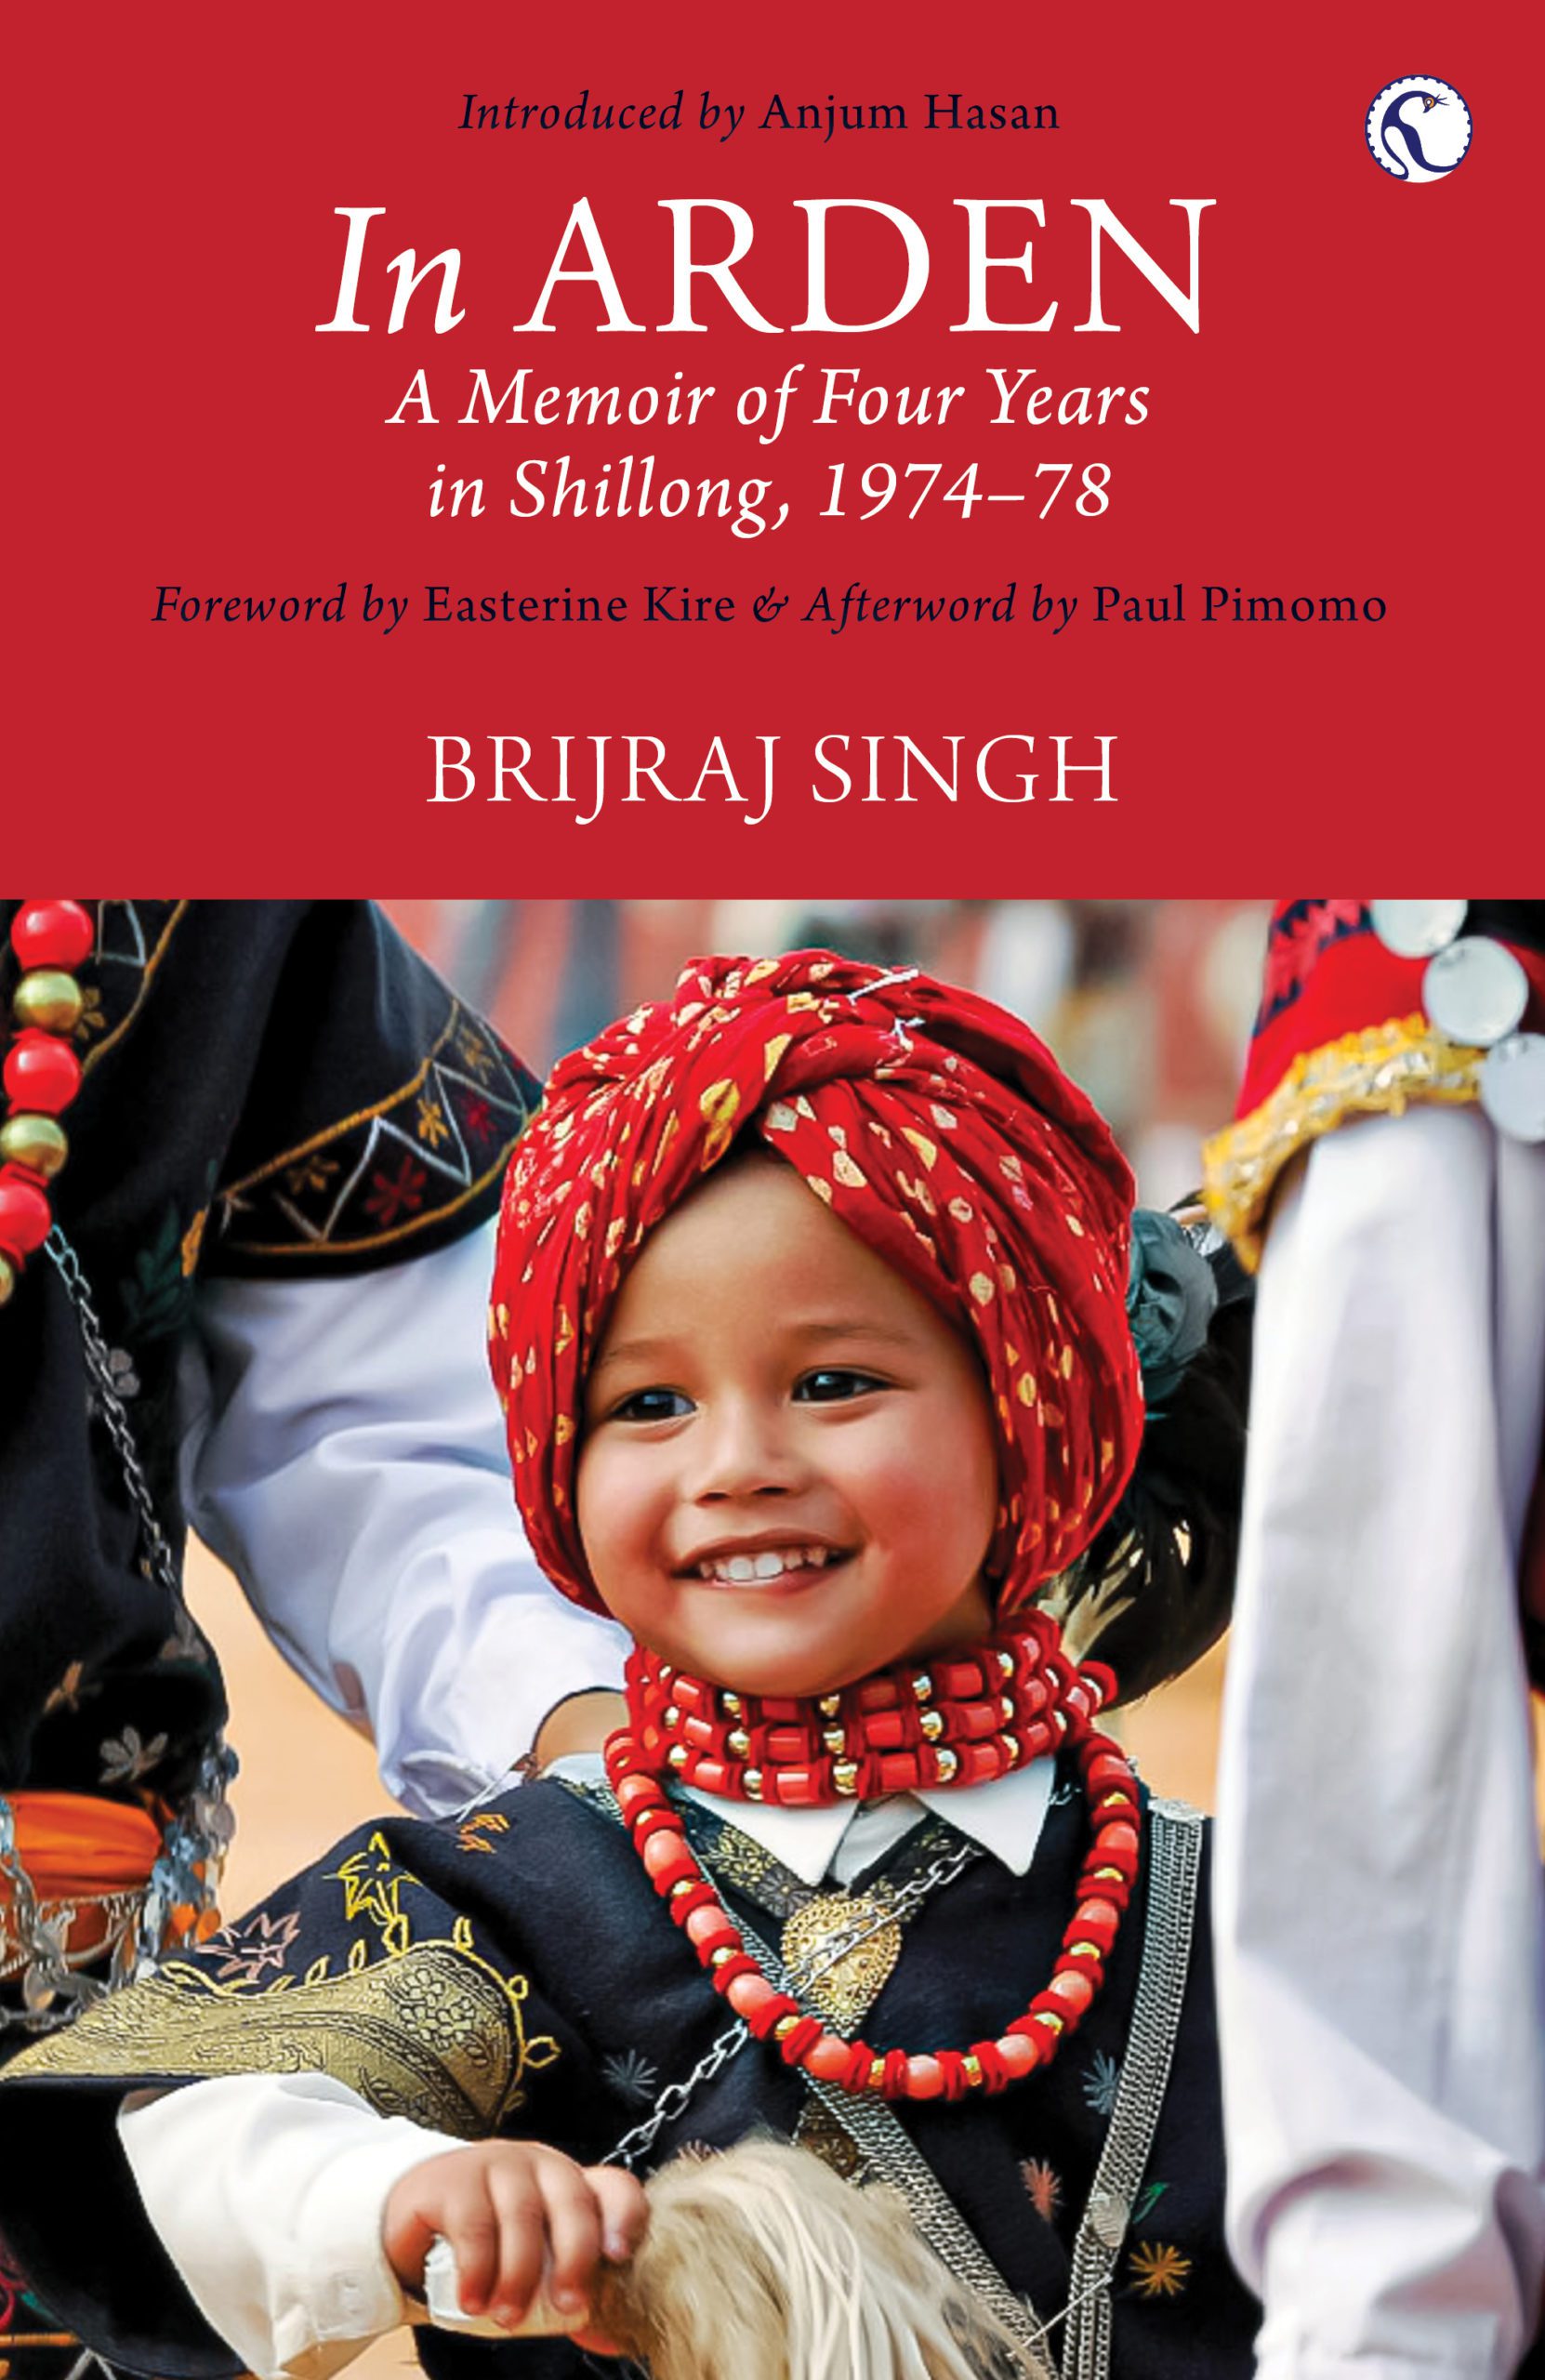 In ARDEN: A Memoir of Four Years in Shillong, 1974-78